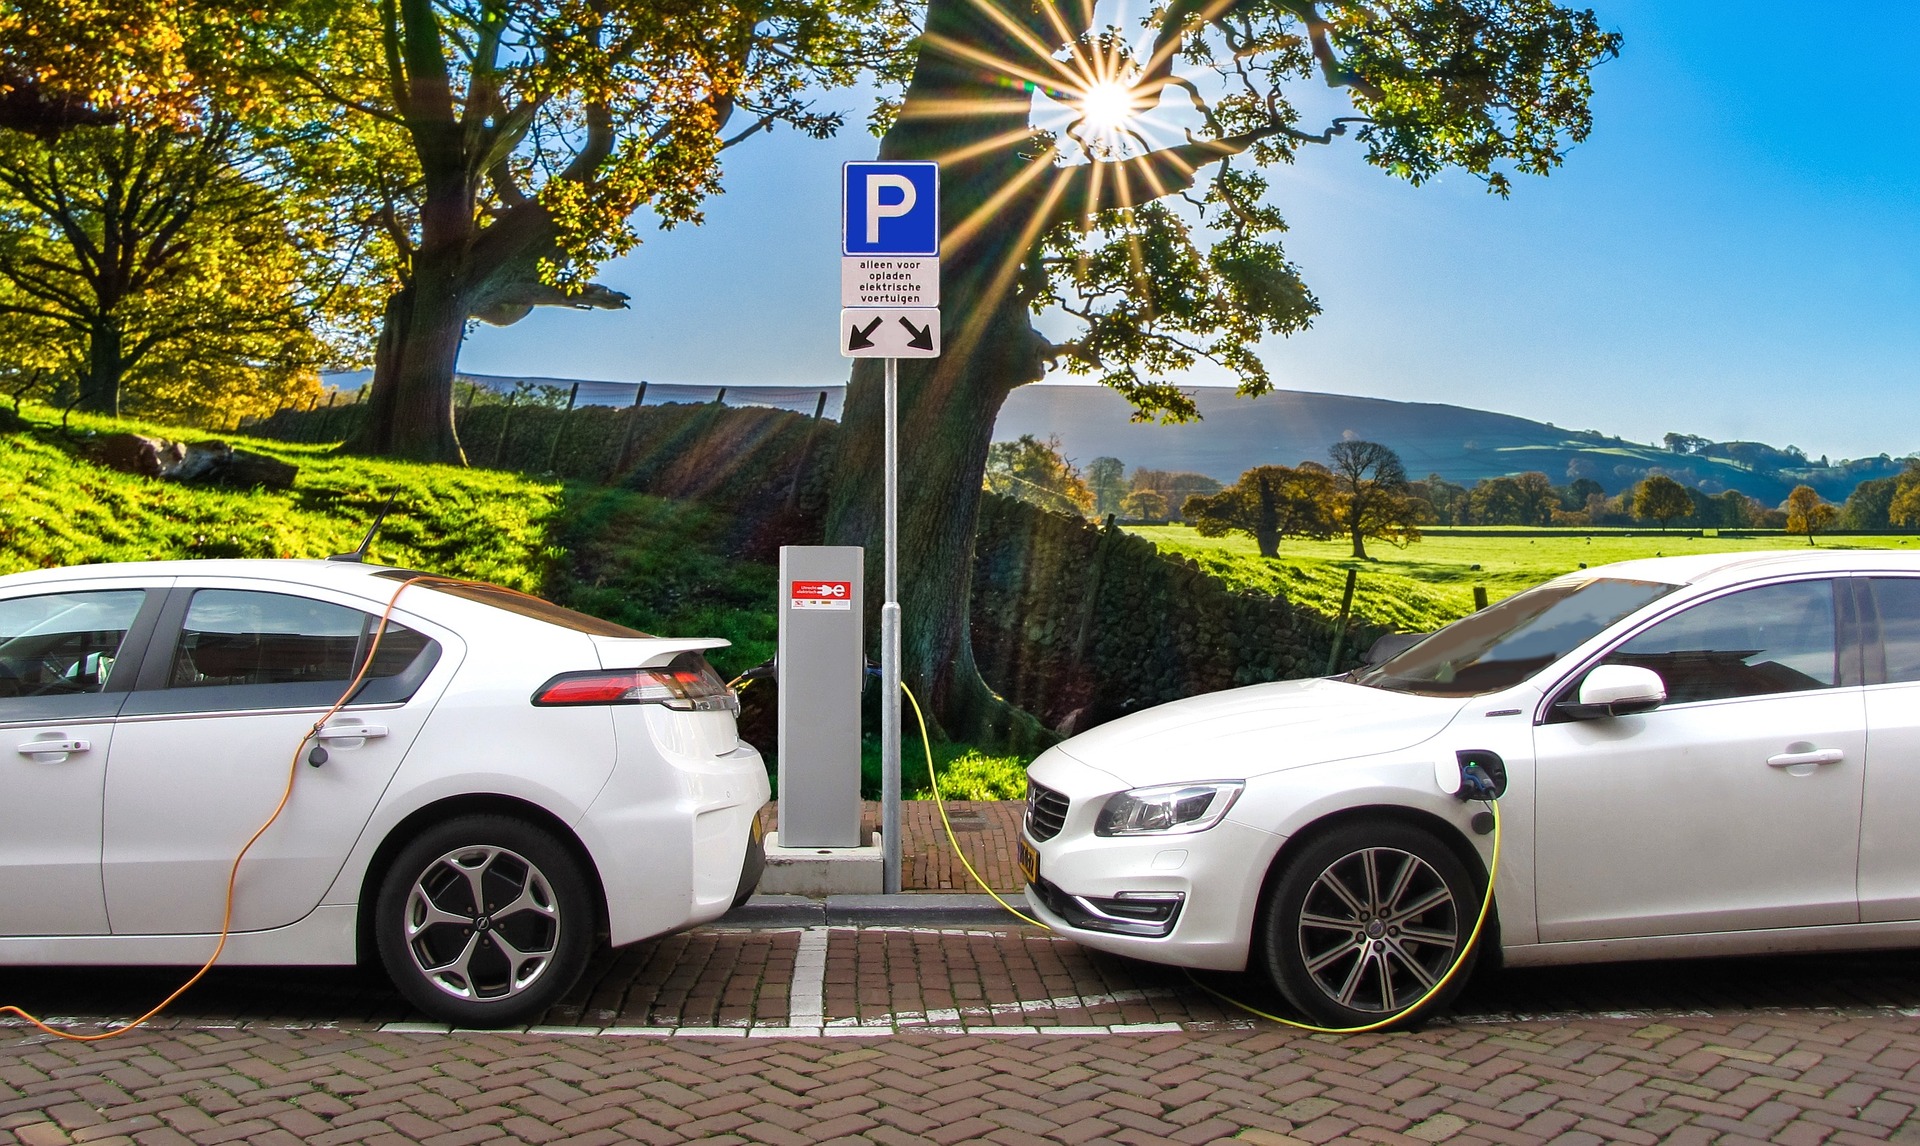 What You Should Know About the Range of Electric Car?